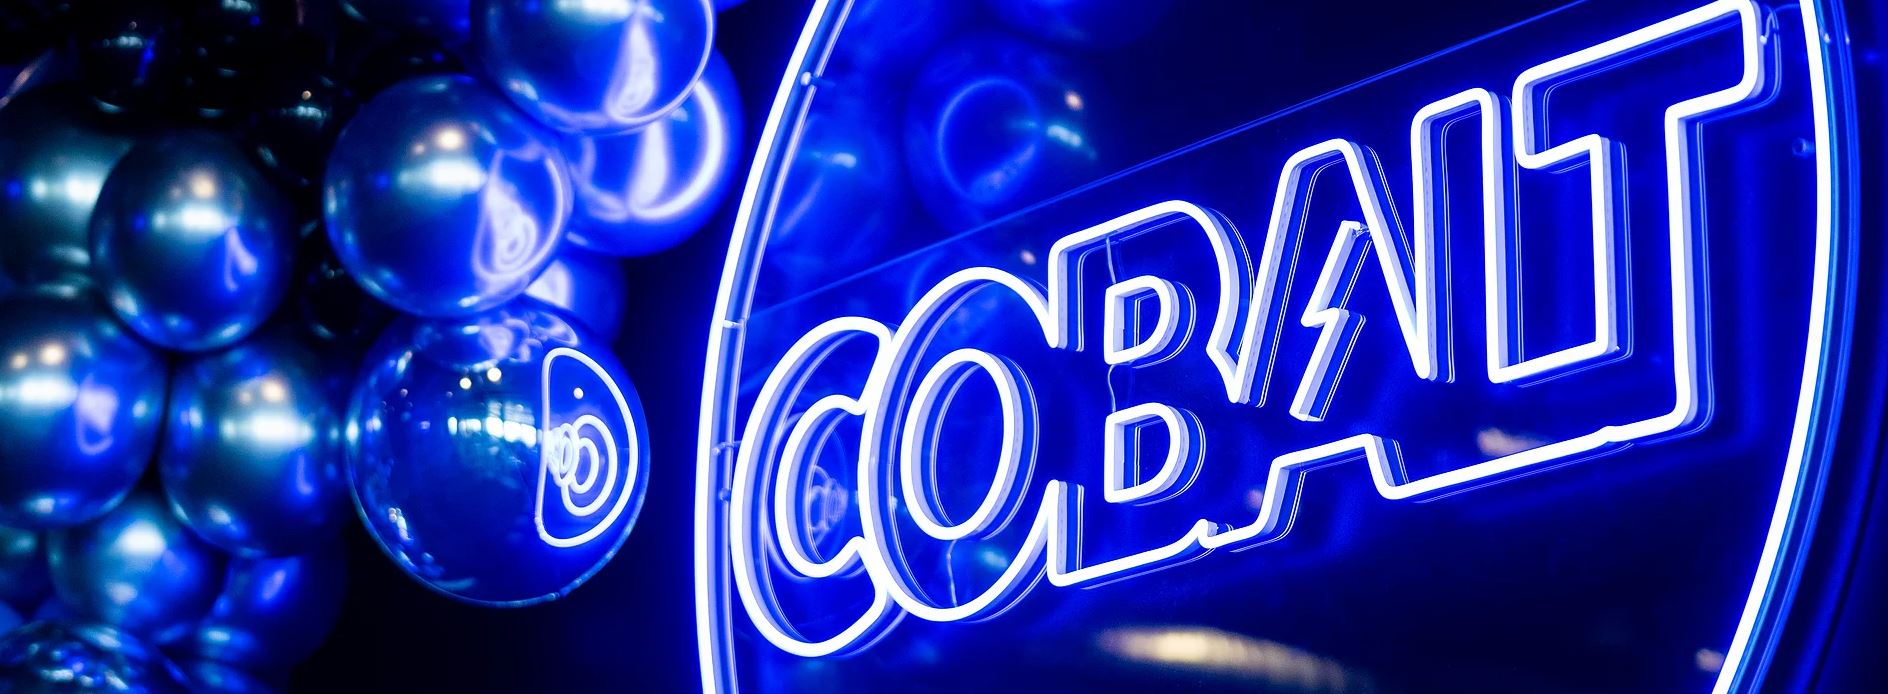 Cobalt Club gym logo in neon on the wall